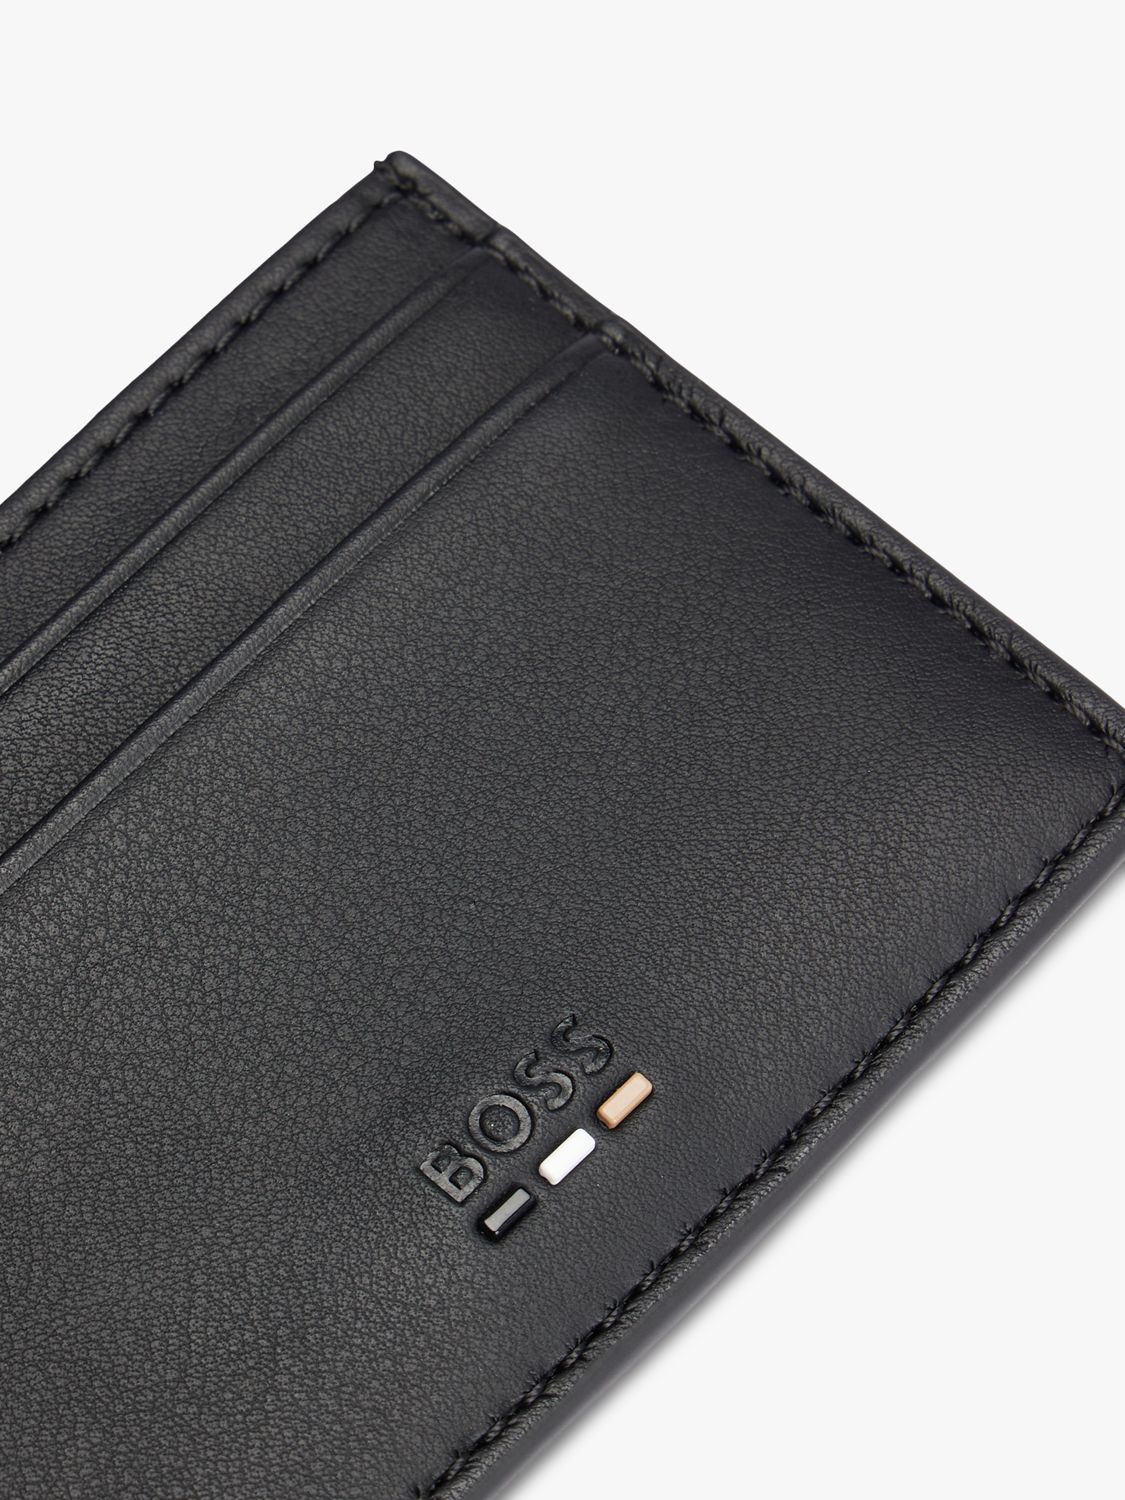 BOSS Ray Card Holder, Black, One Size